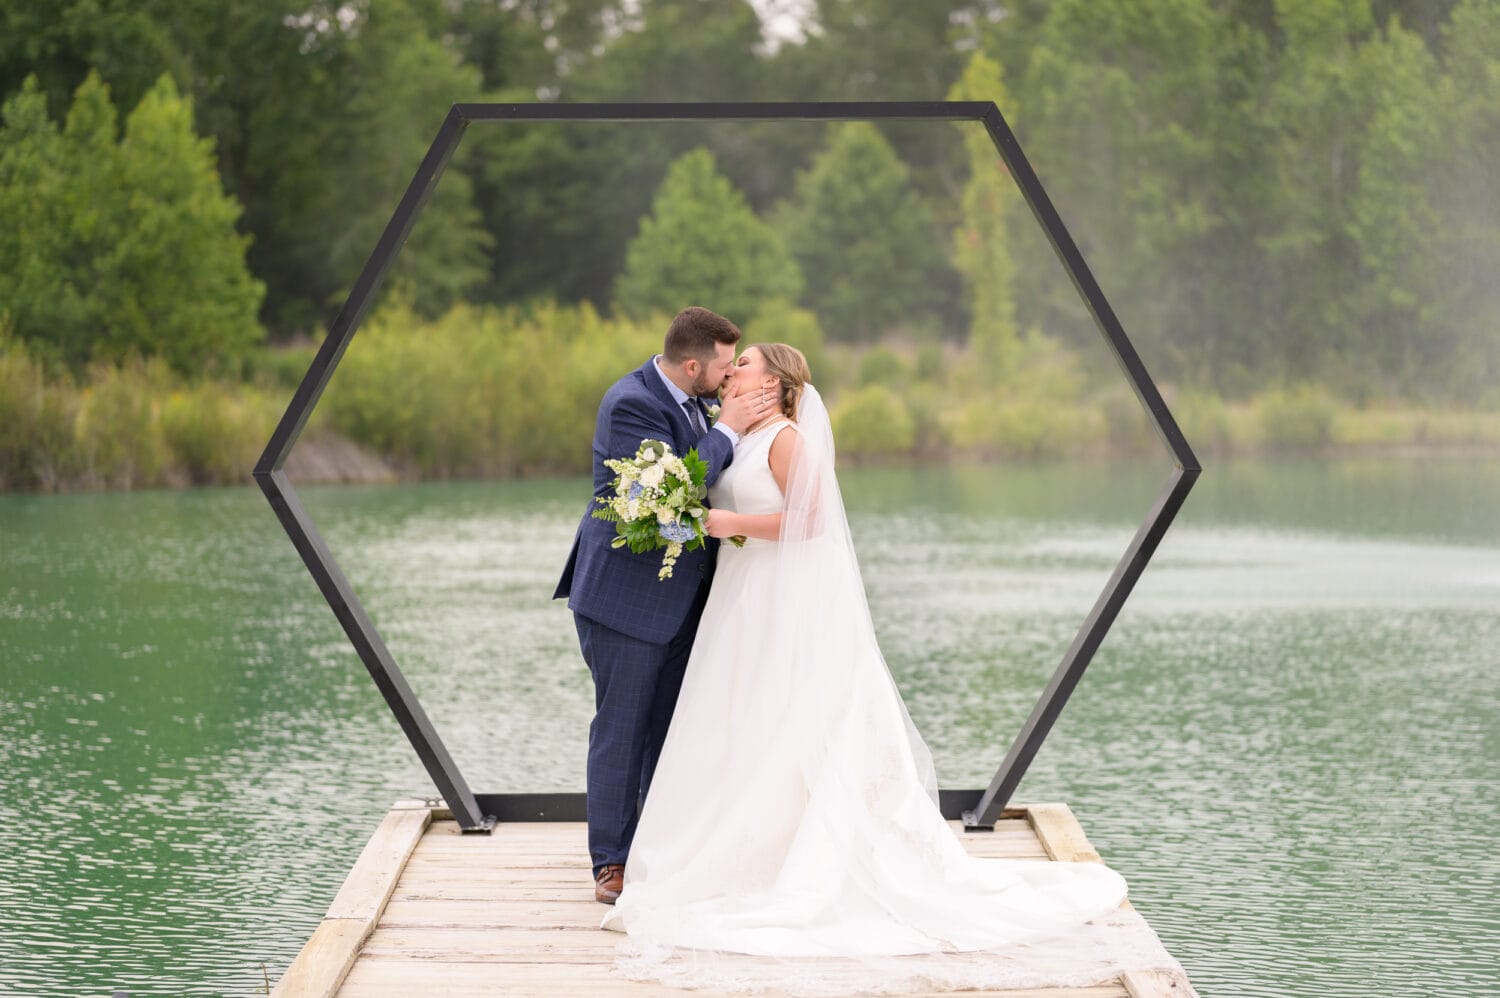 Portraits of the bride and groom in front of the hexagon on the lake - The Venue at White Oaks Farm